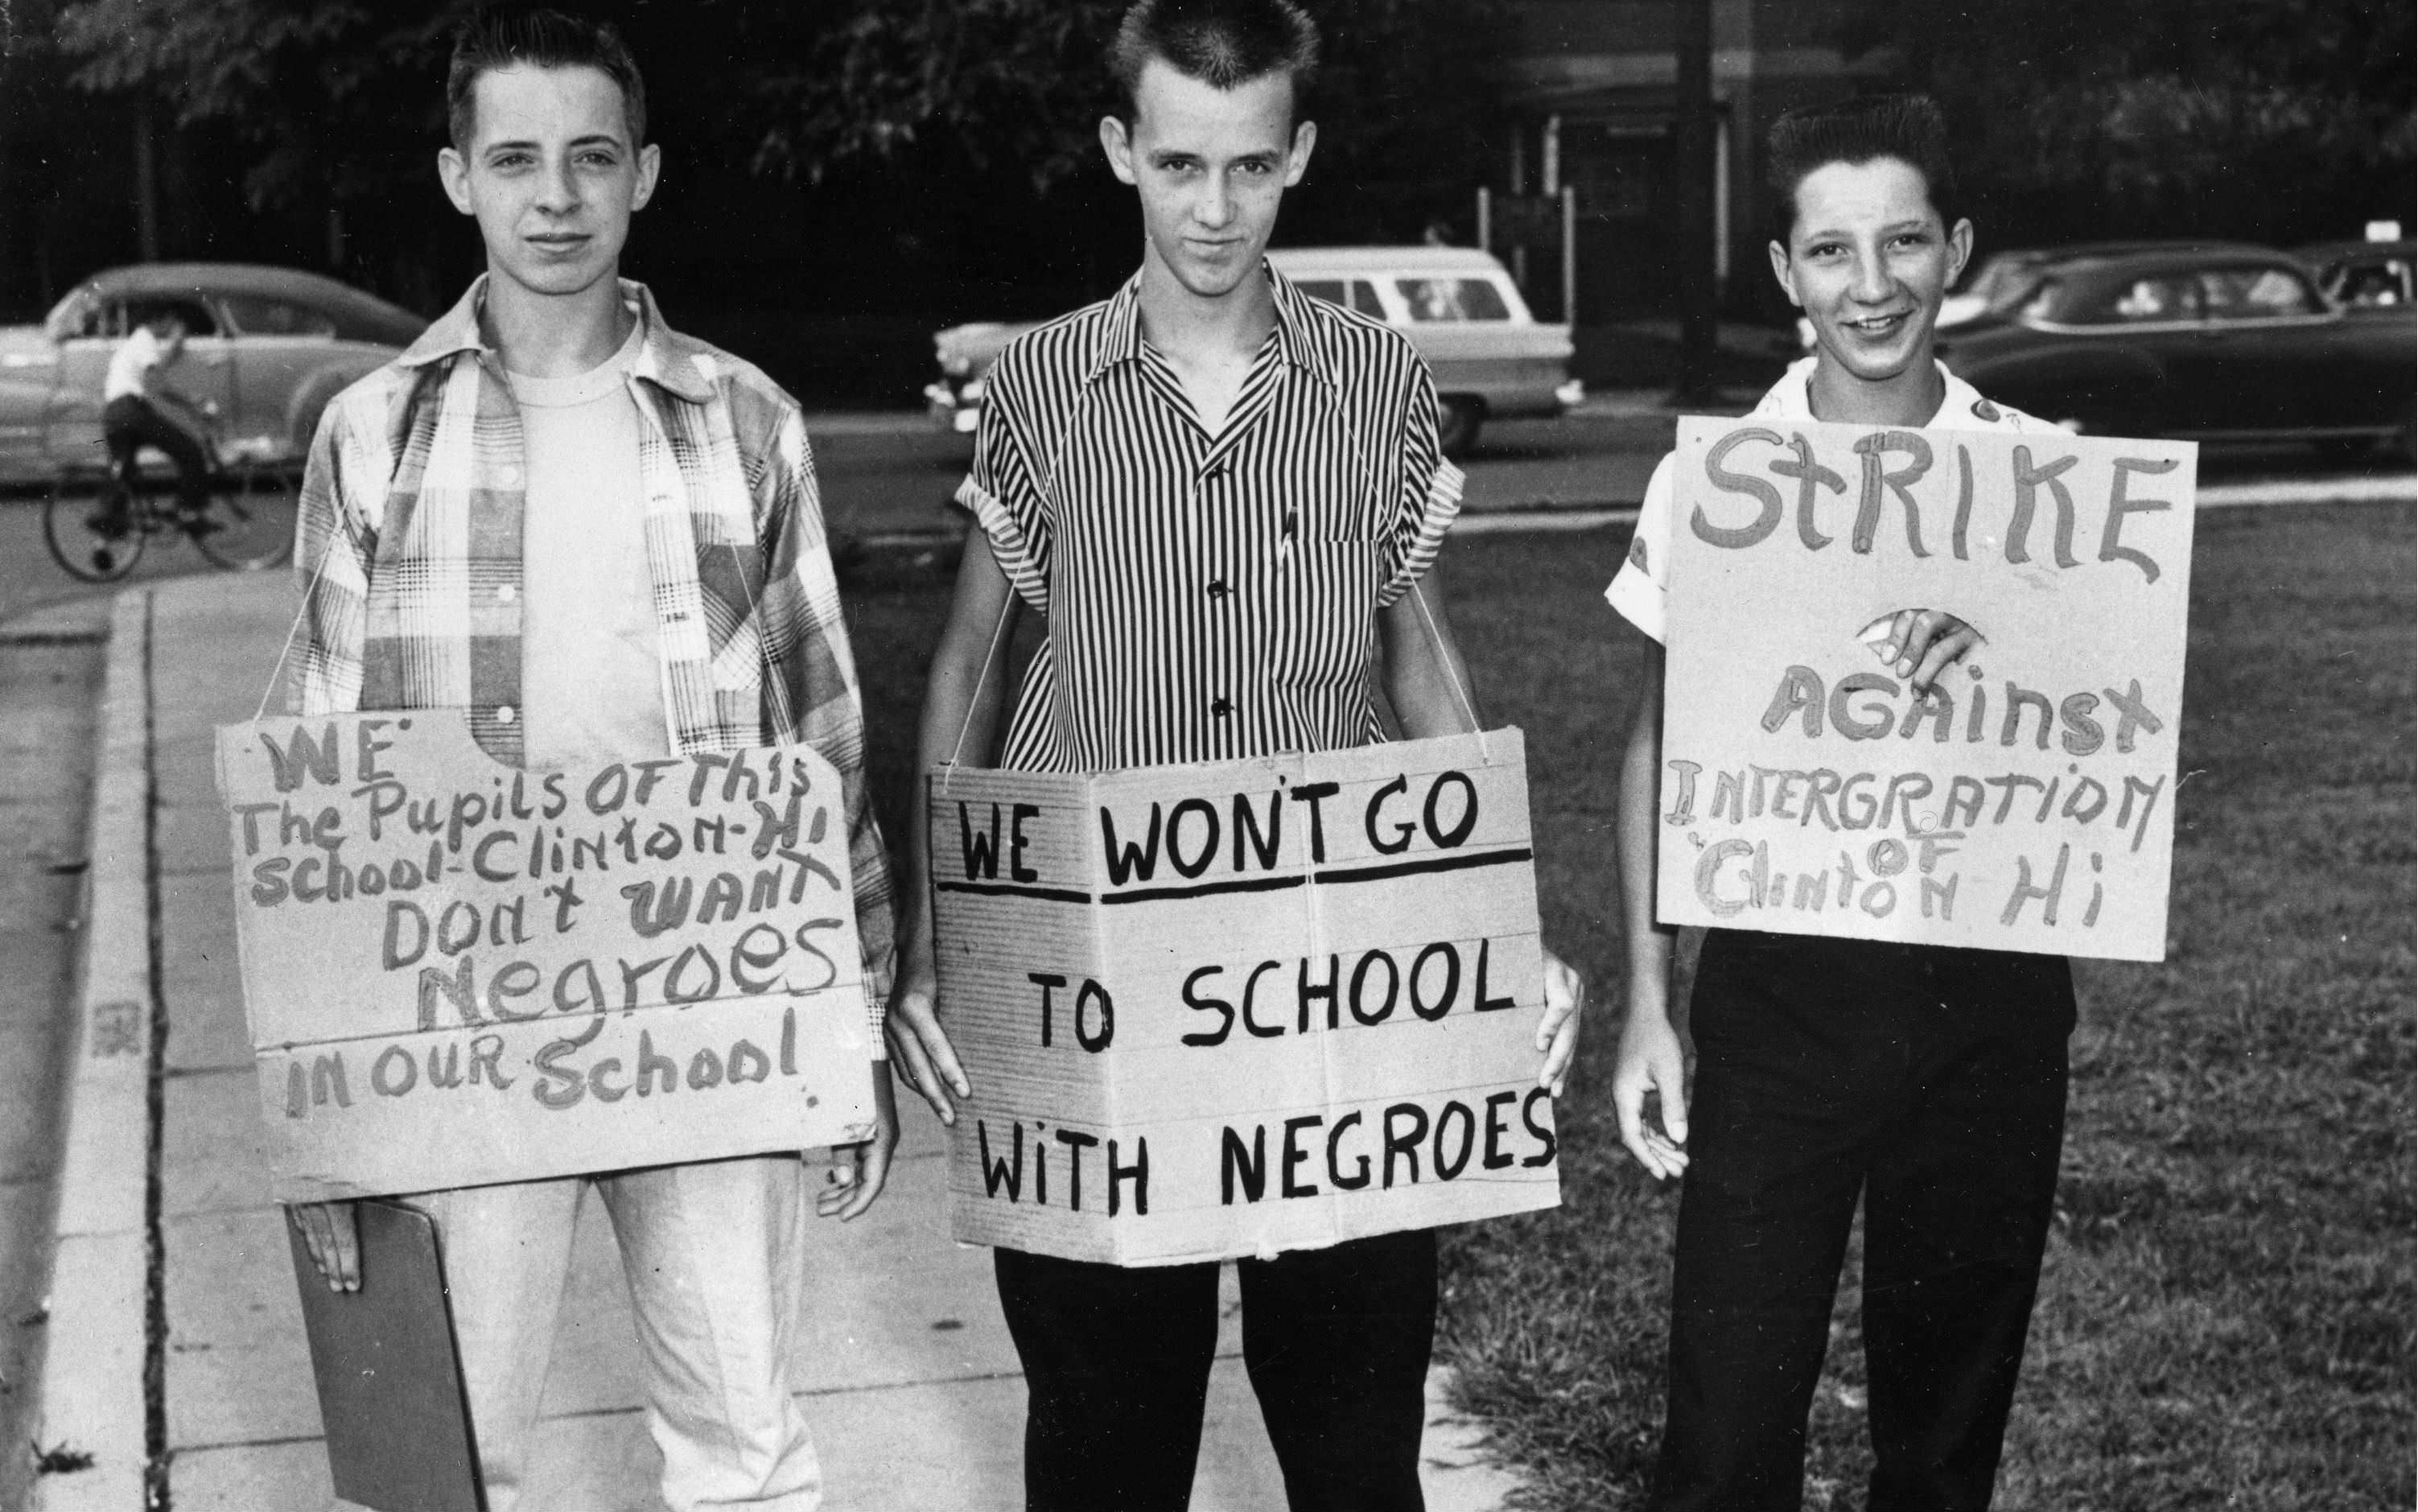 3 Students picketing against integrating Clinton High School in Tennessee, US in 1956. It's ironic the young man on the right can't spell.